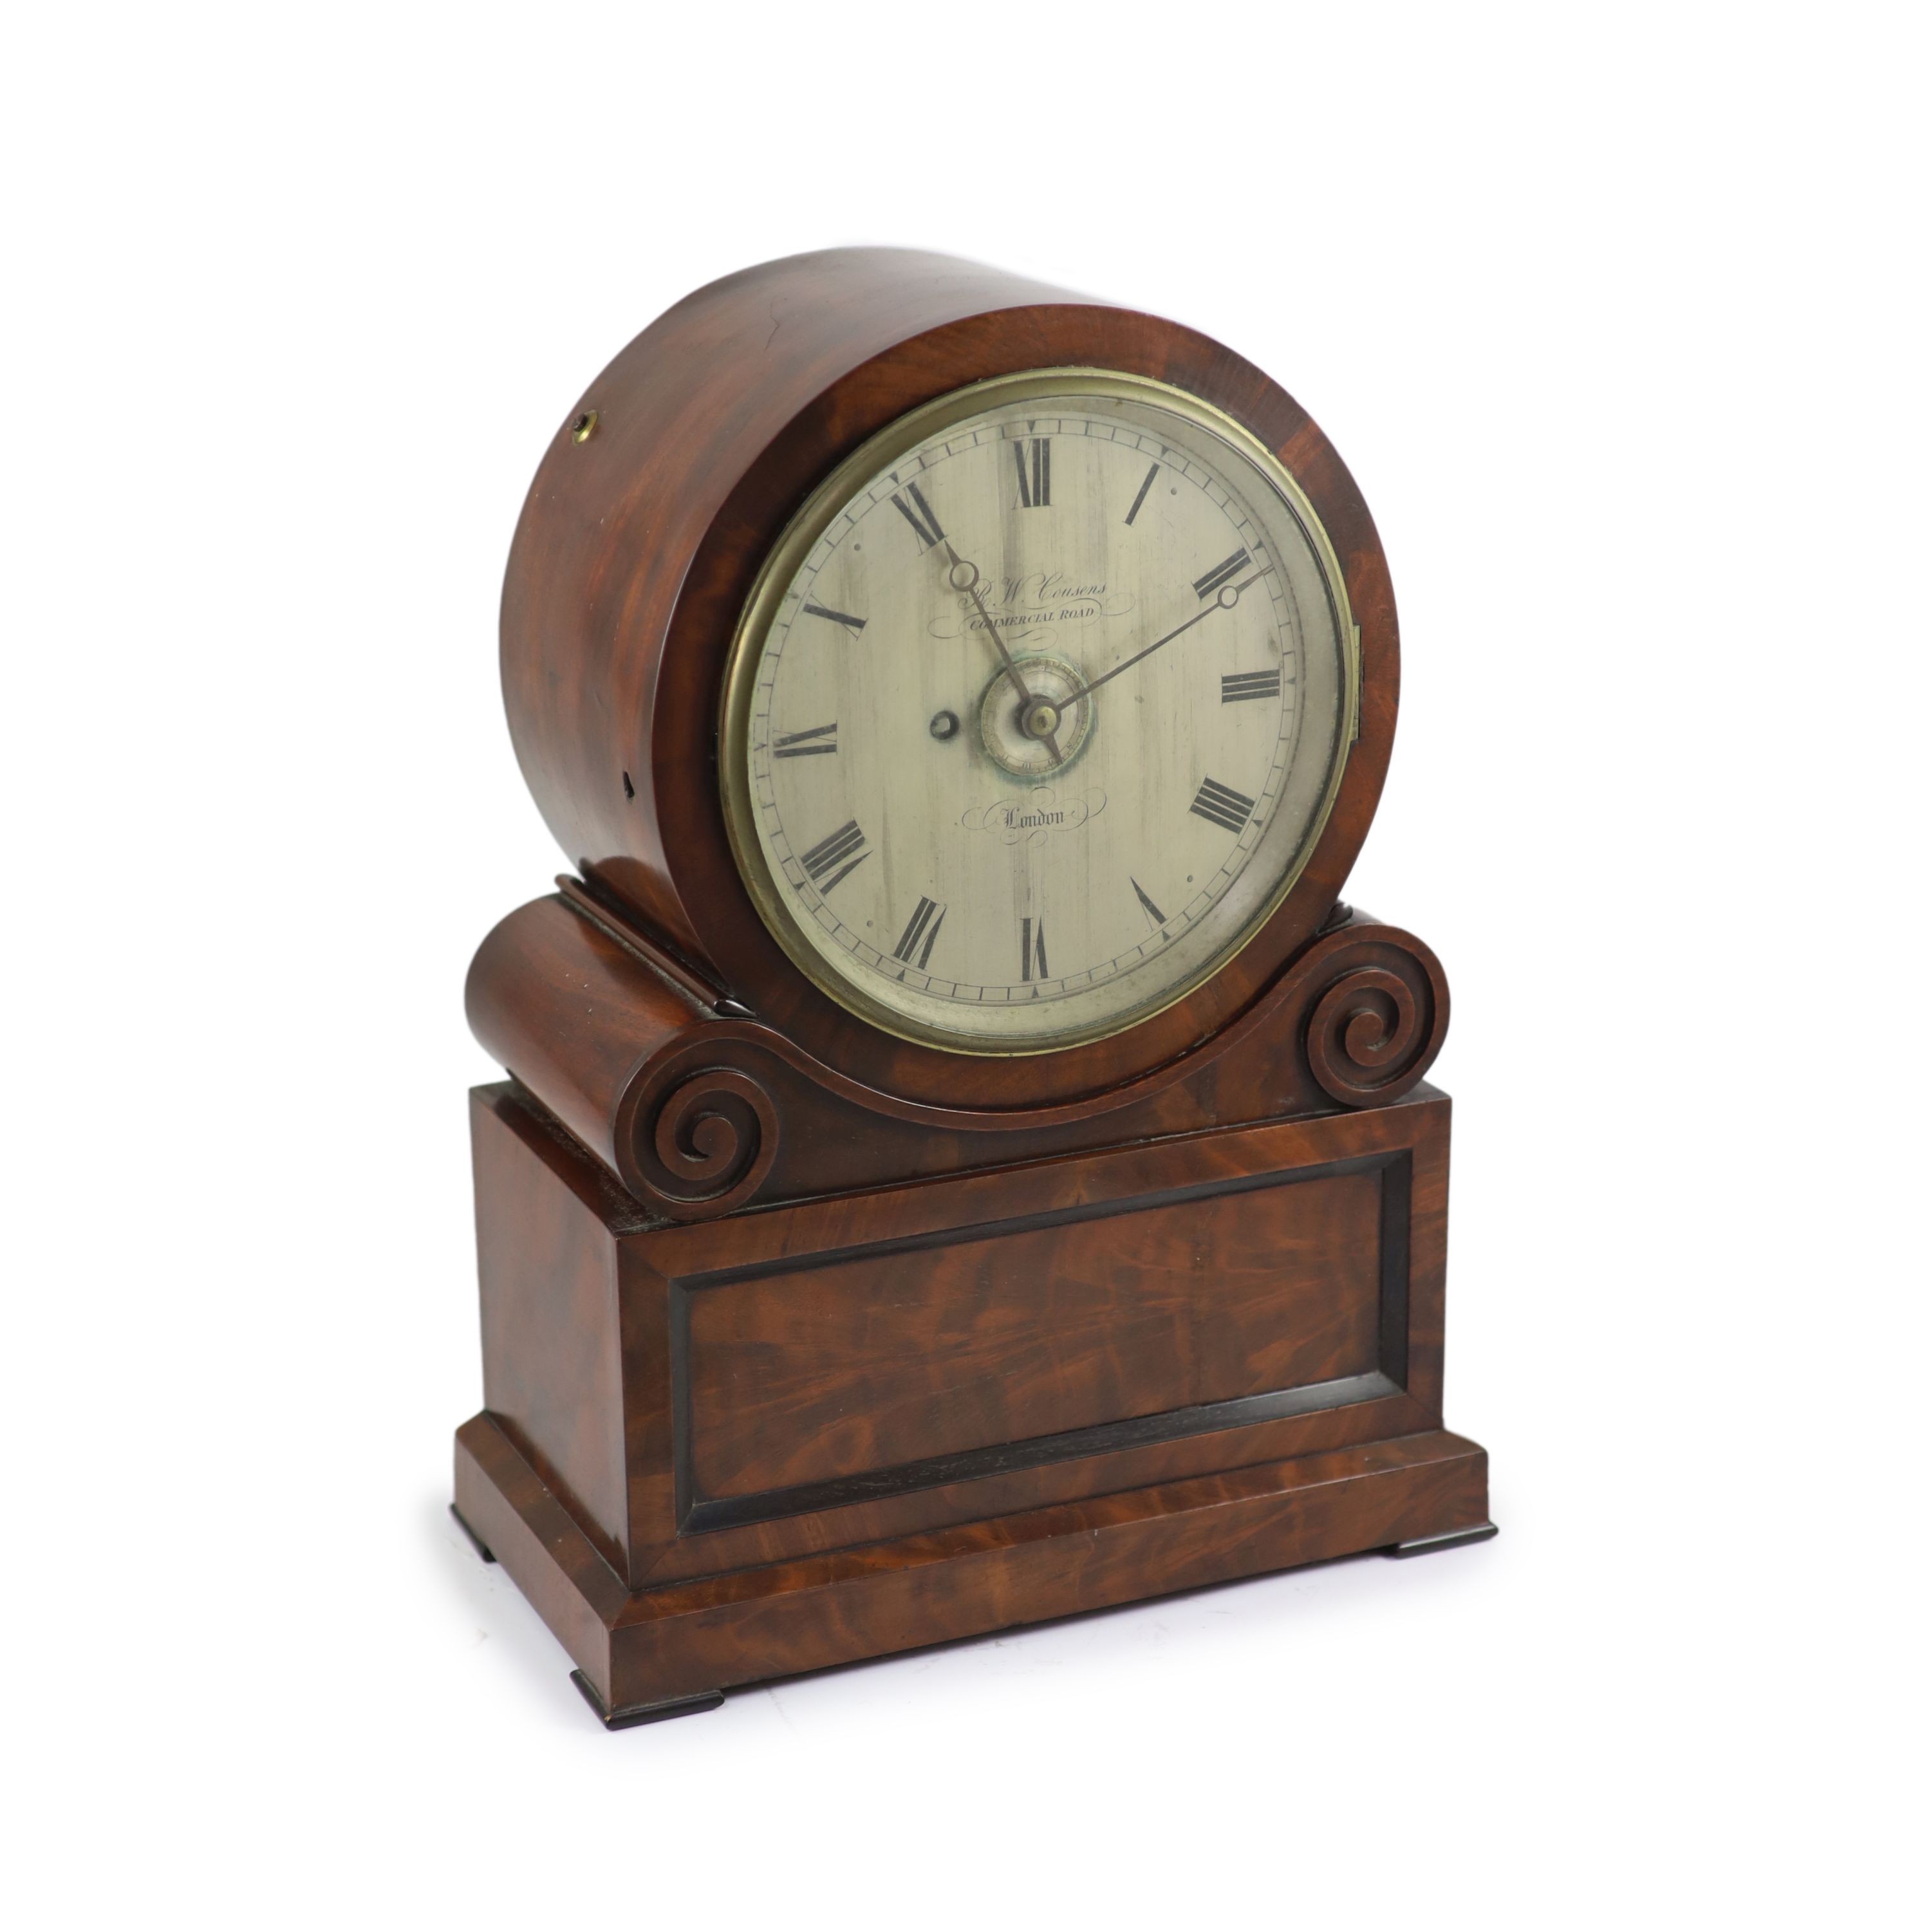 R W Cousens of Commercial Road, London, an early 19th century mahogany bracket timepiece H 43cm. W 32cm. D 17cm.